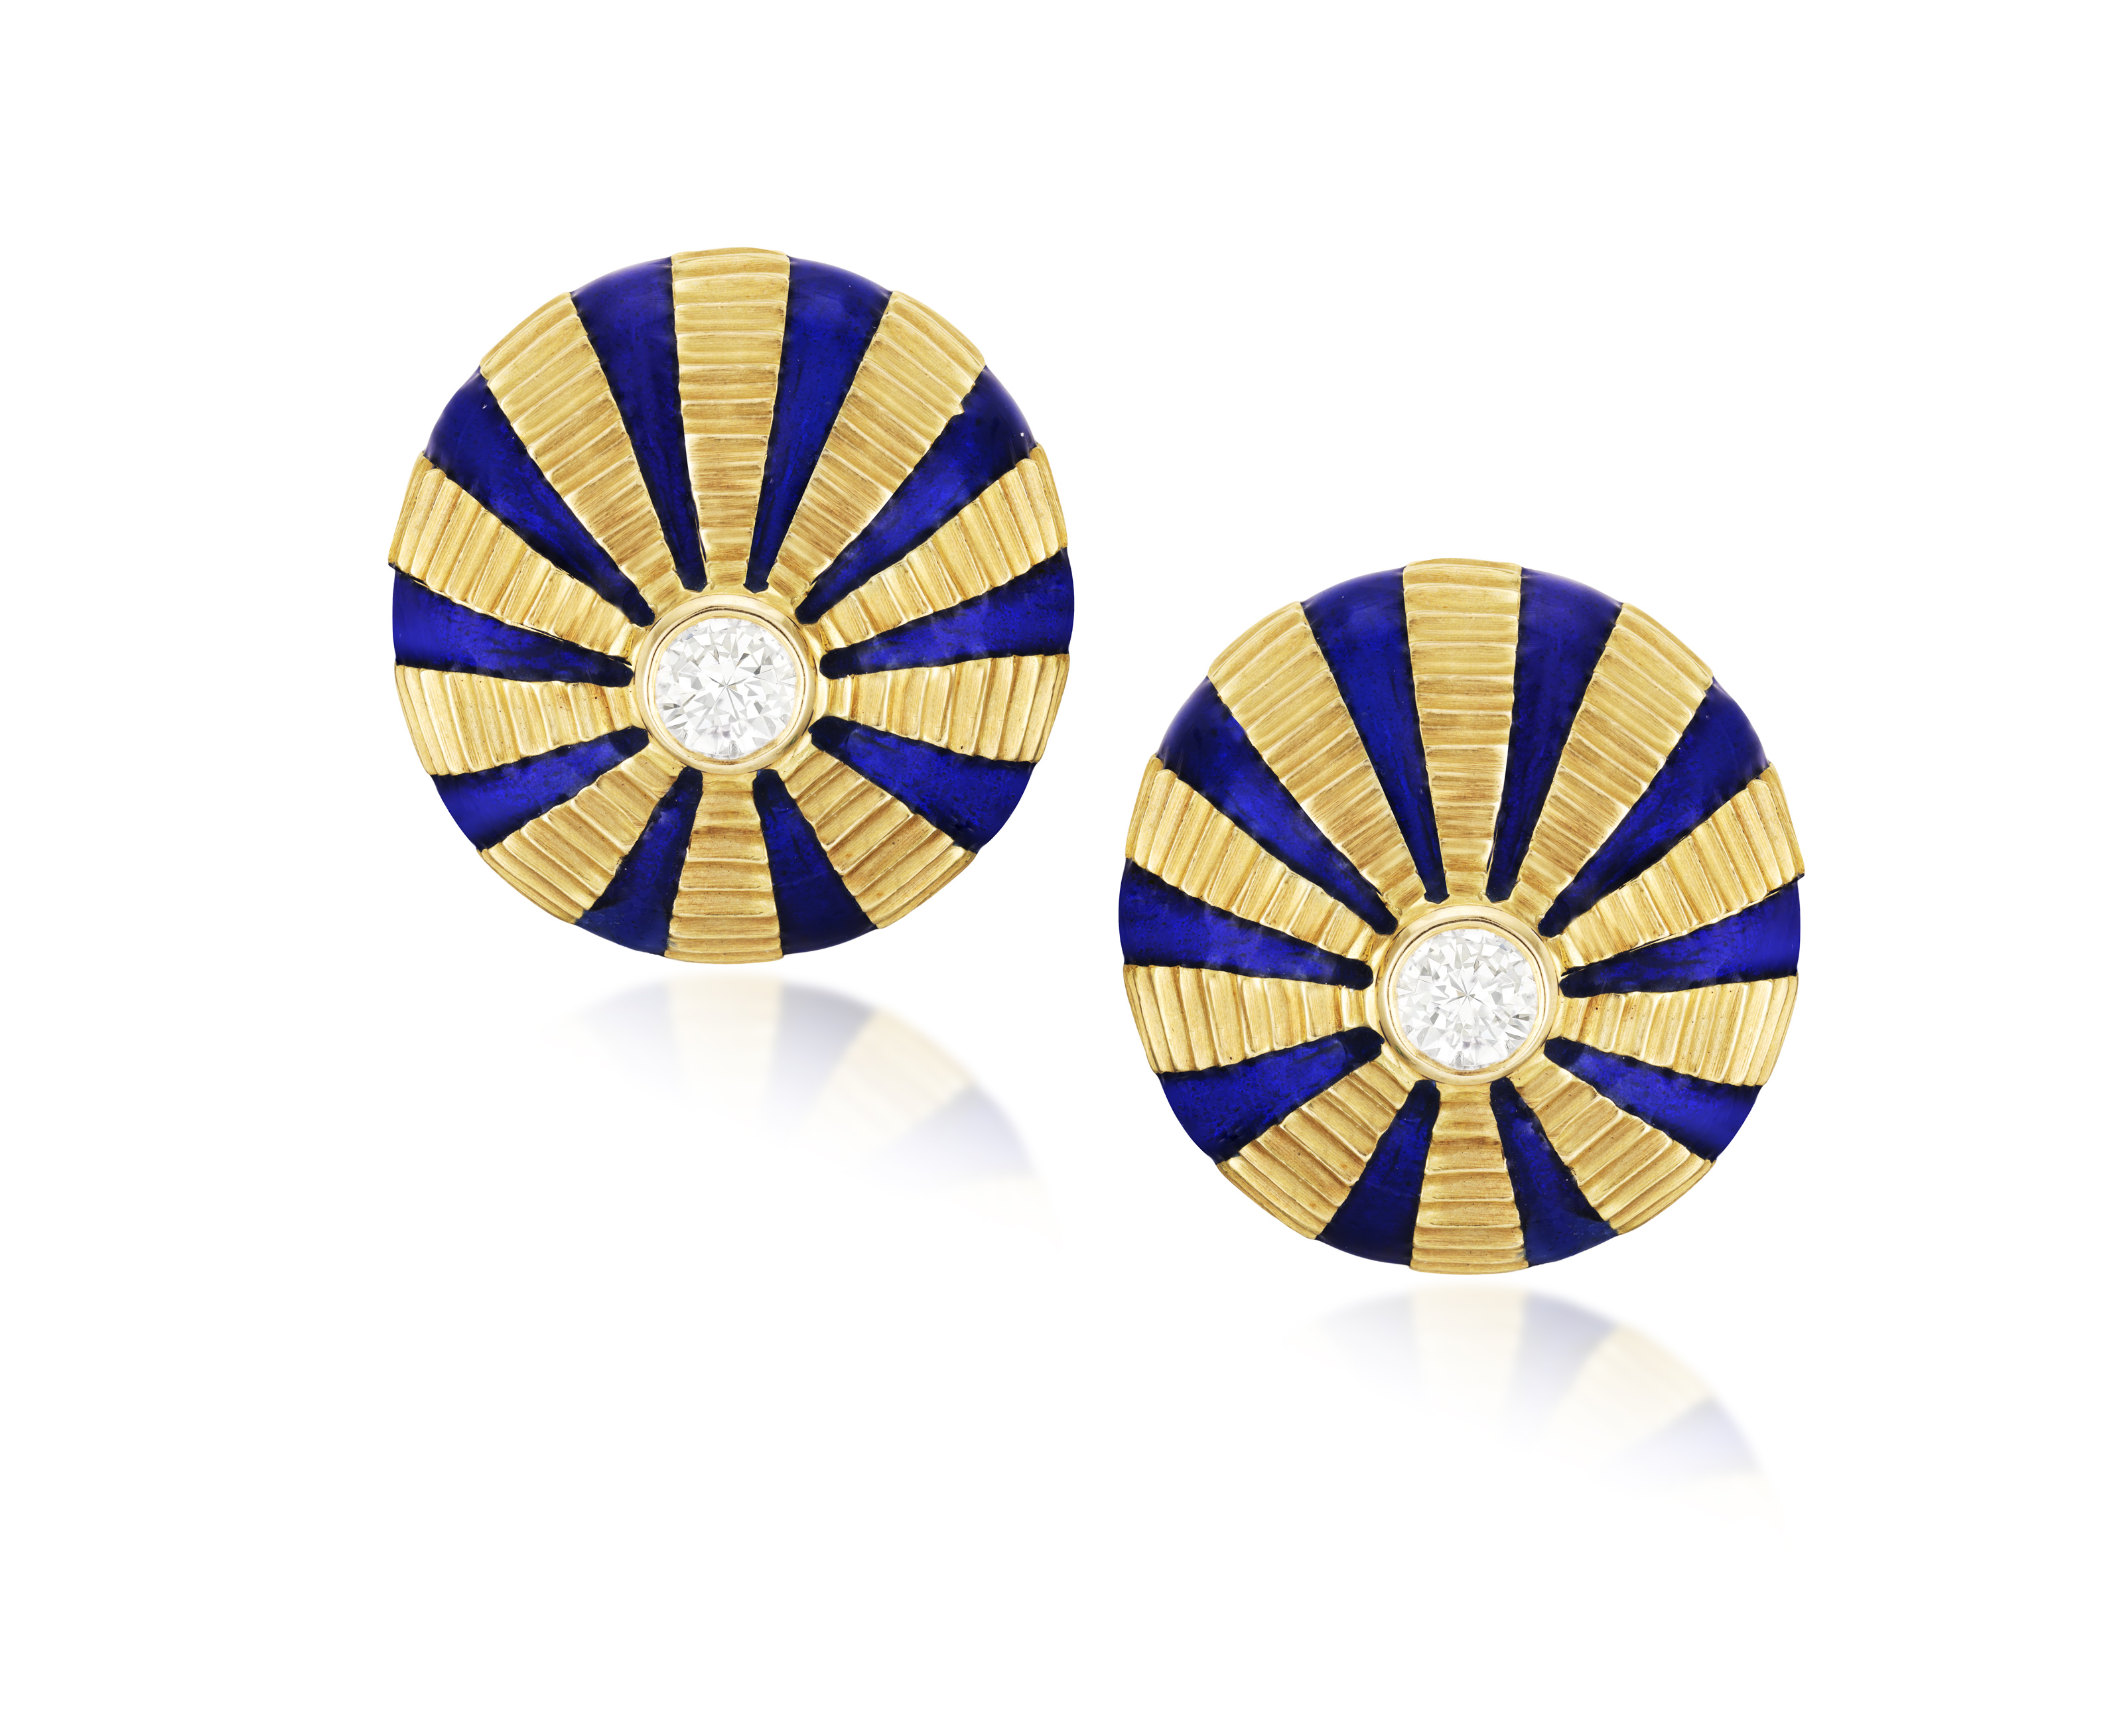 A PAIR OF DIAMOND AND ENAMEL 'TAJ MAHAL' EARCLIPS, DESIGNED BY JEAN SCHLUMBERGER FOR TIFFANY AND CO.